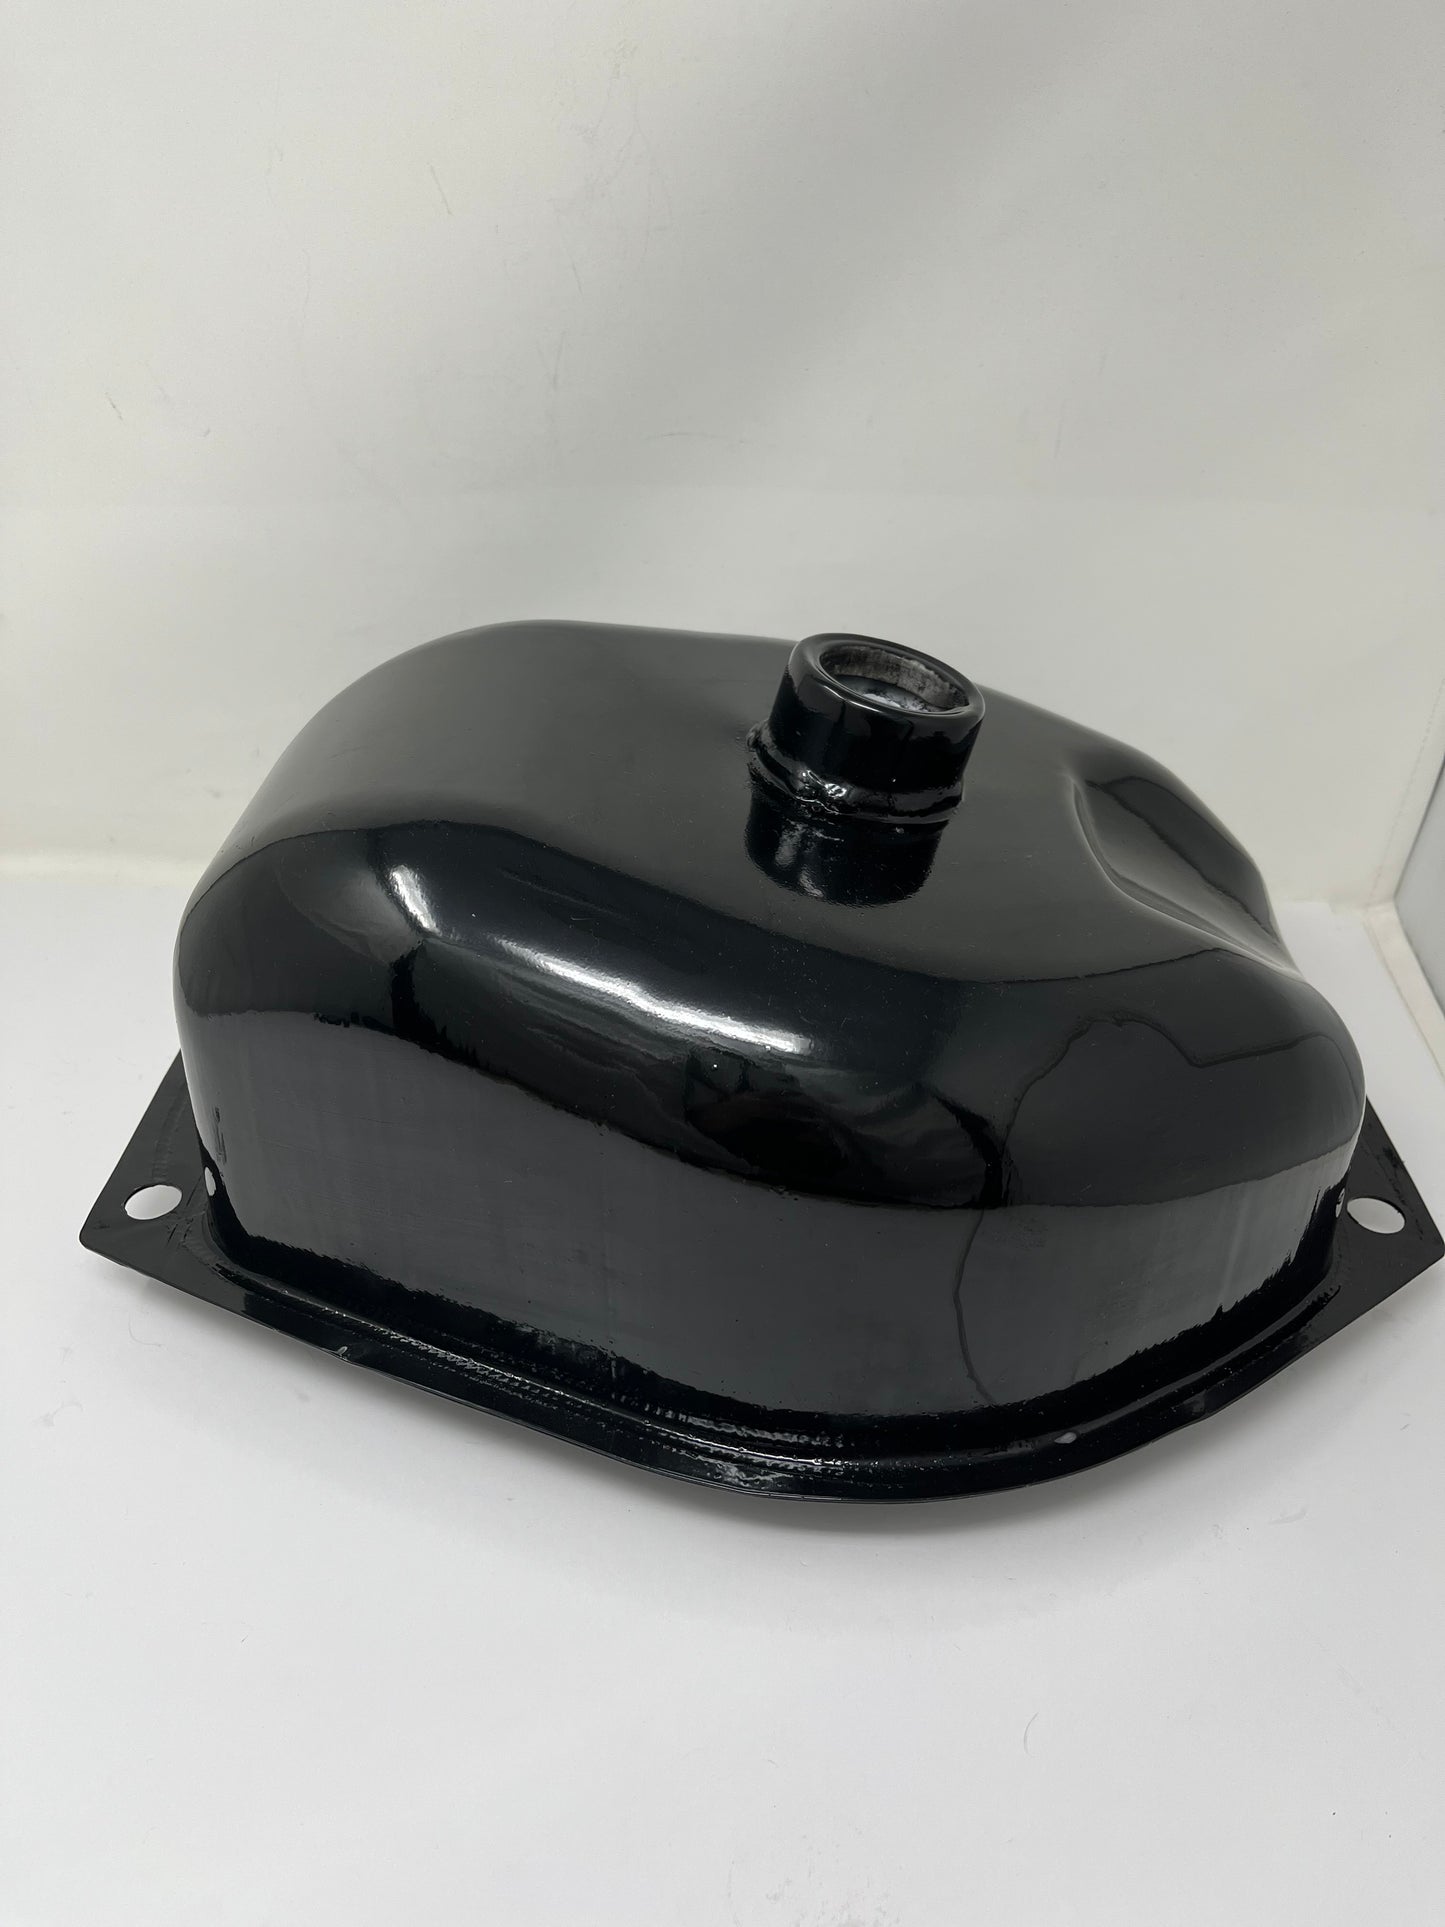 DF50SST gas tank for sale. Metal gas tank for X18 50cc